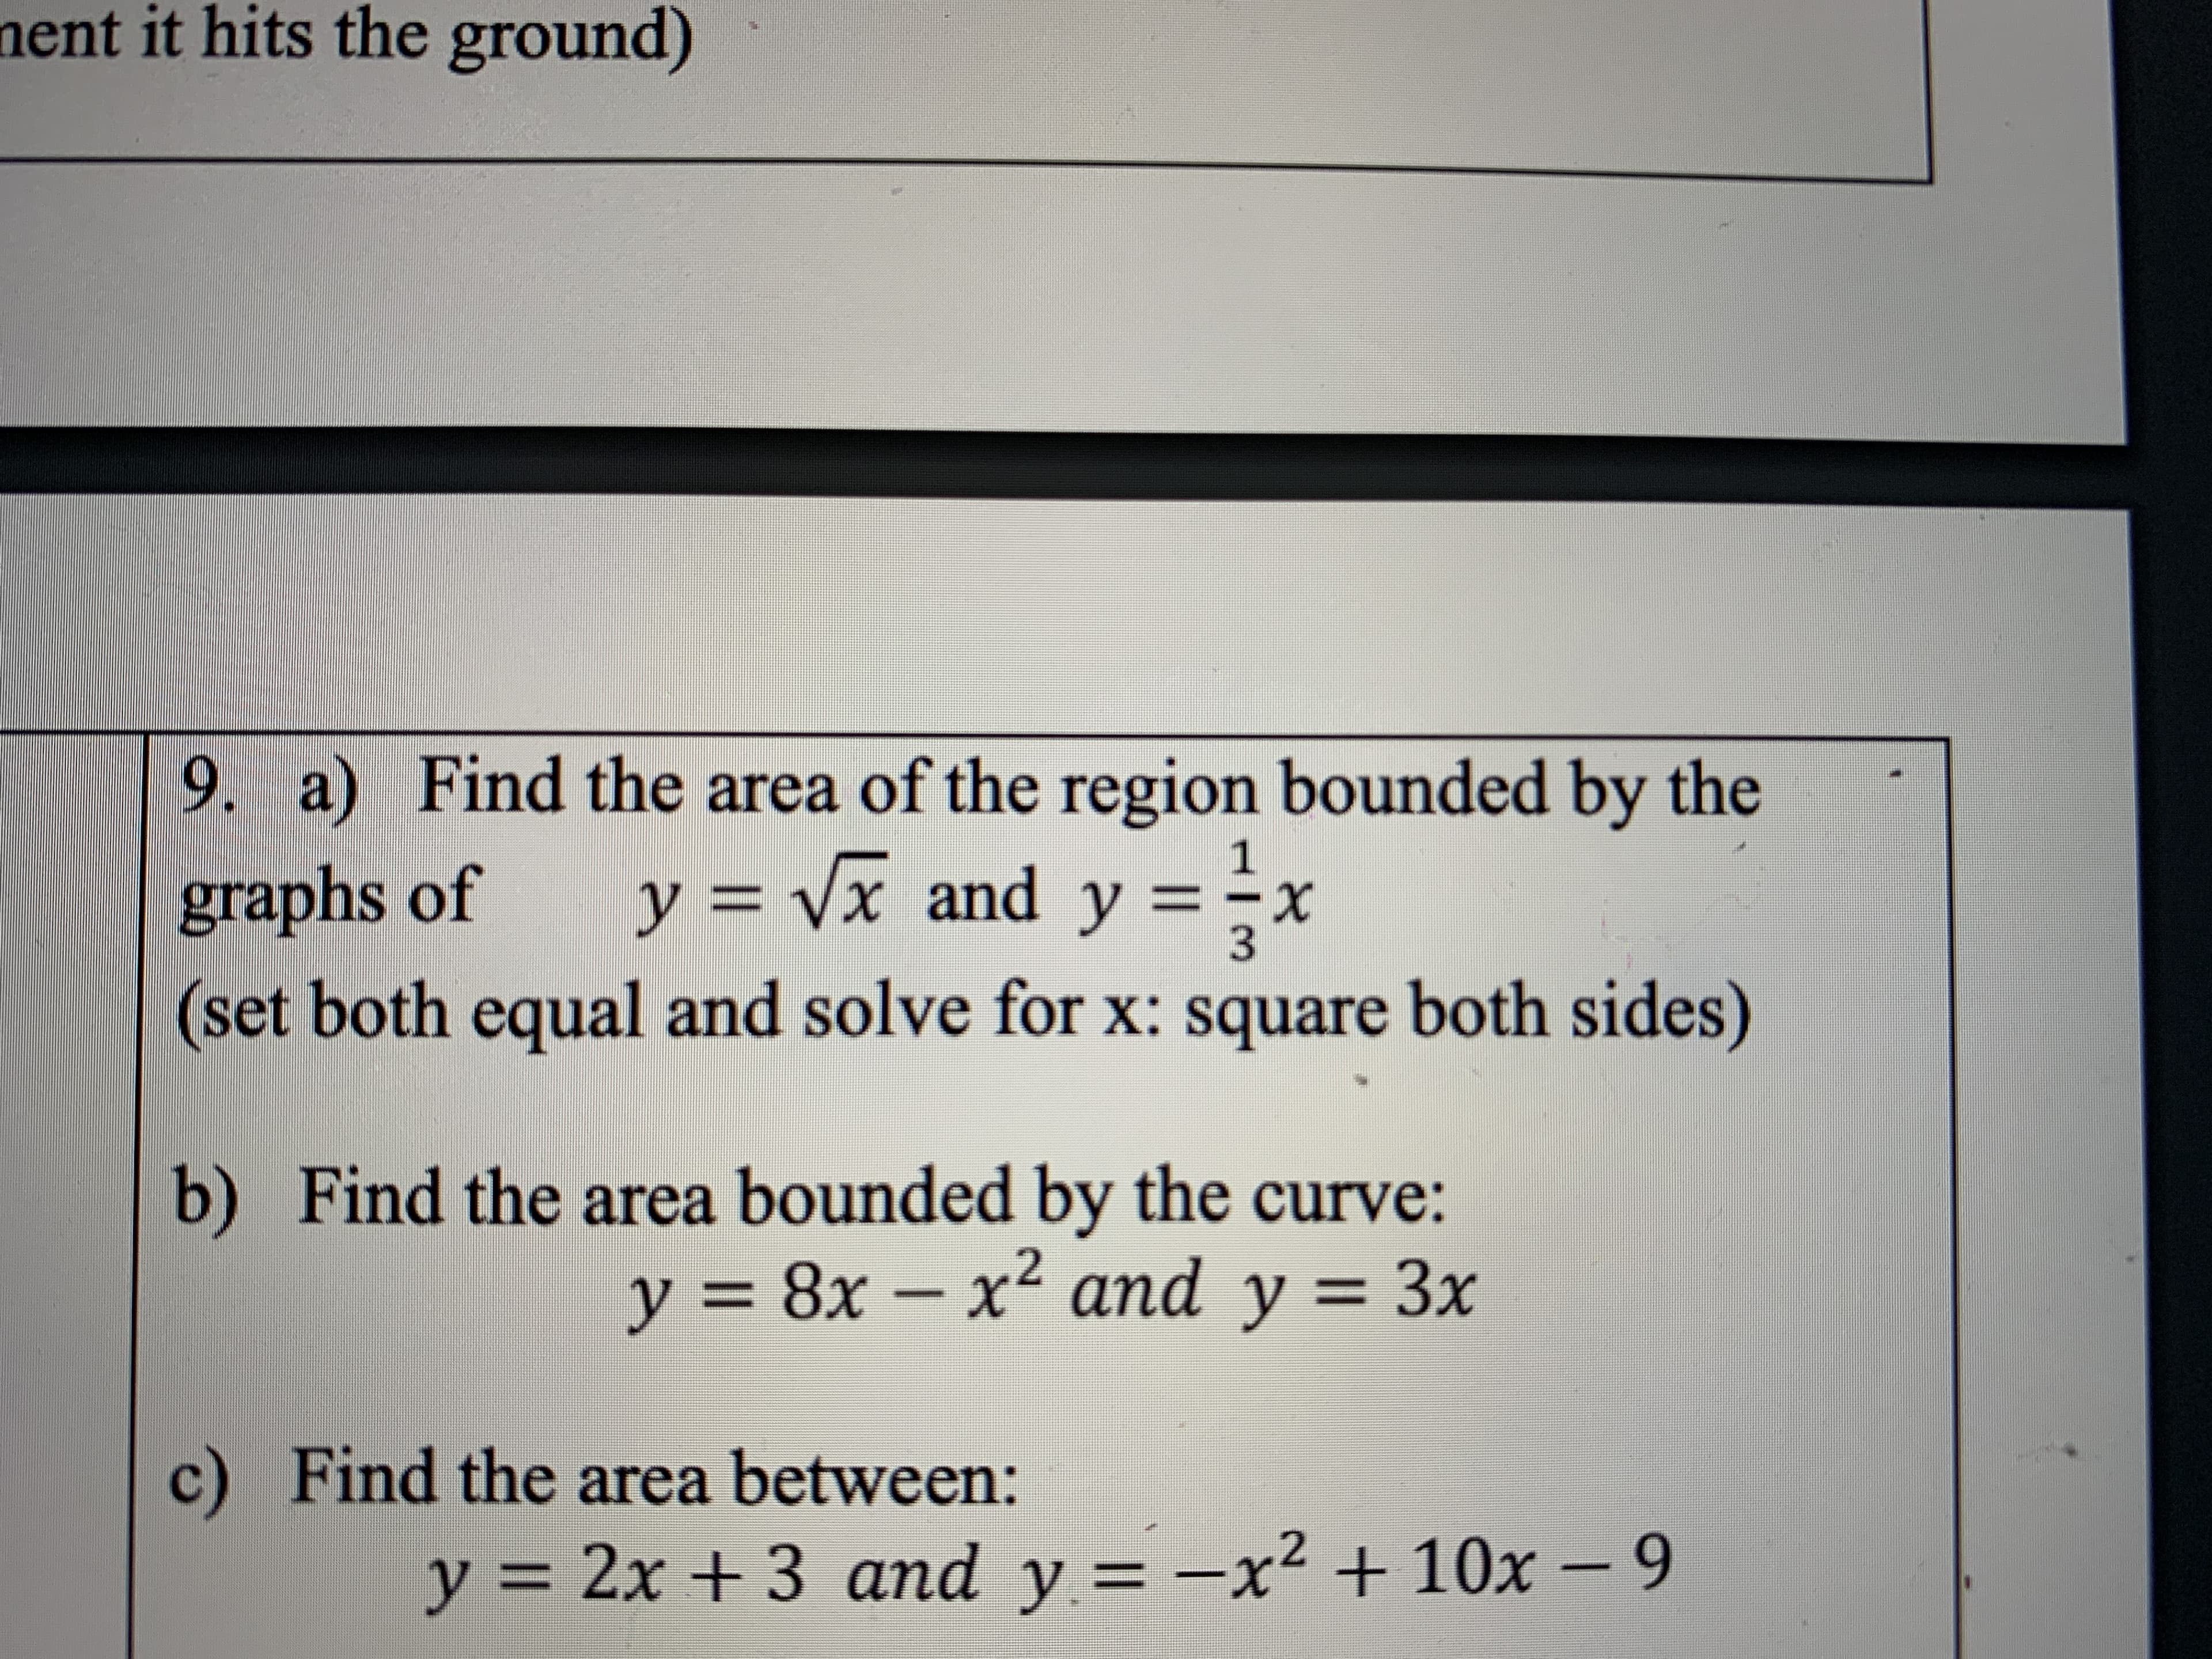 Find the area bounded by the curve:
y = 8x – x² and y = 3x
